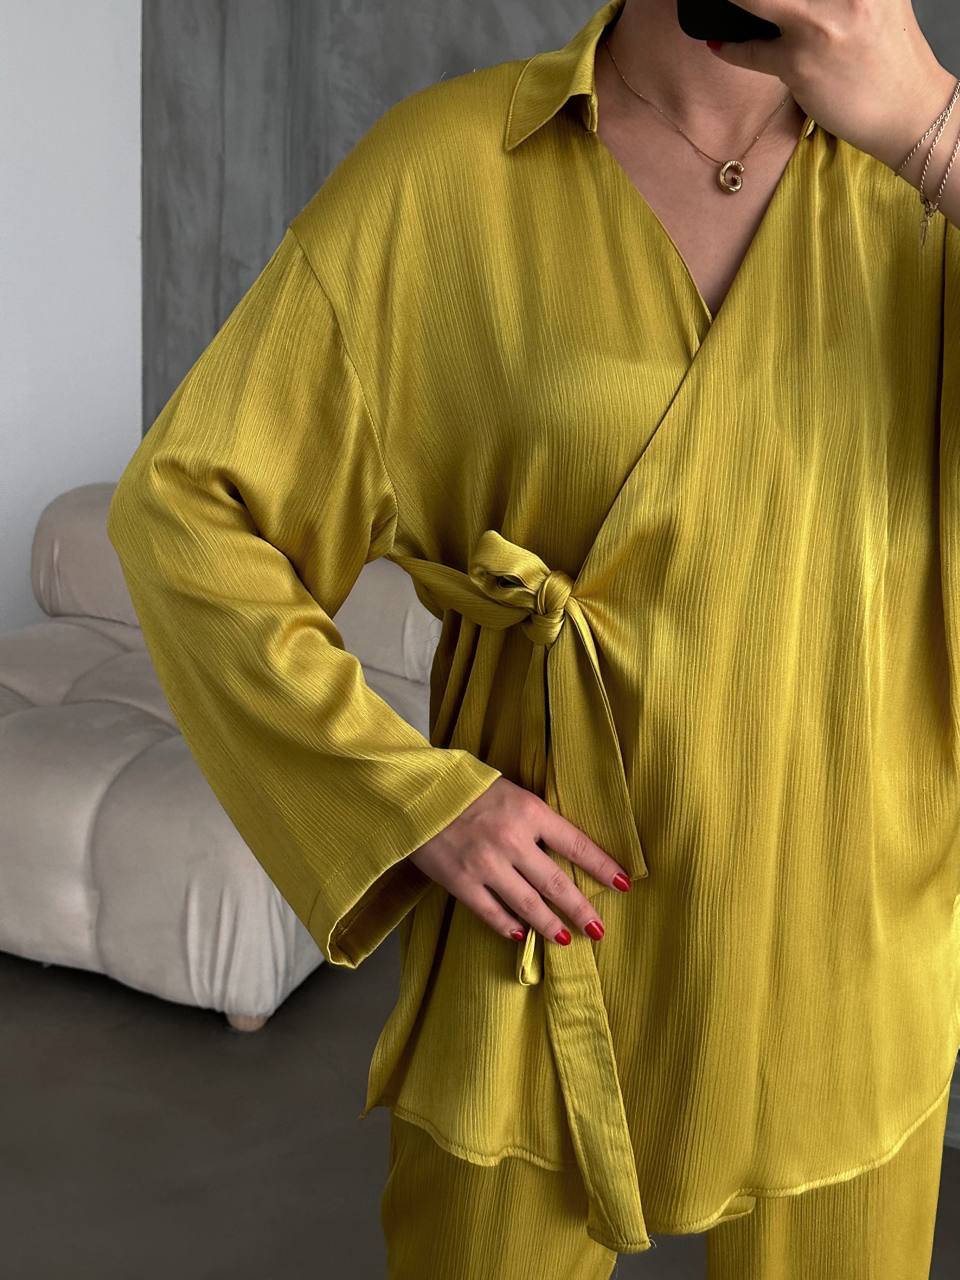 Luxe Satin Tie Set Chartreuse